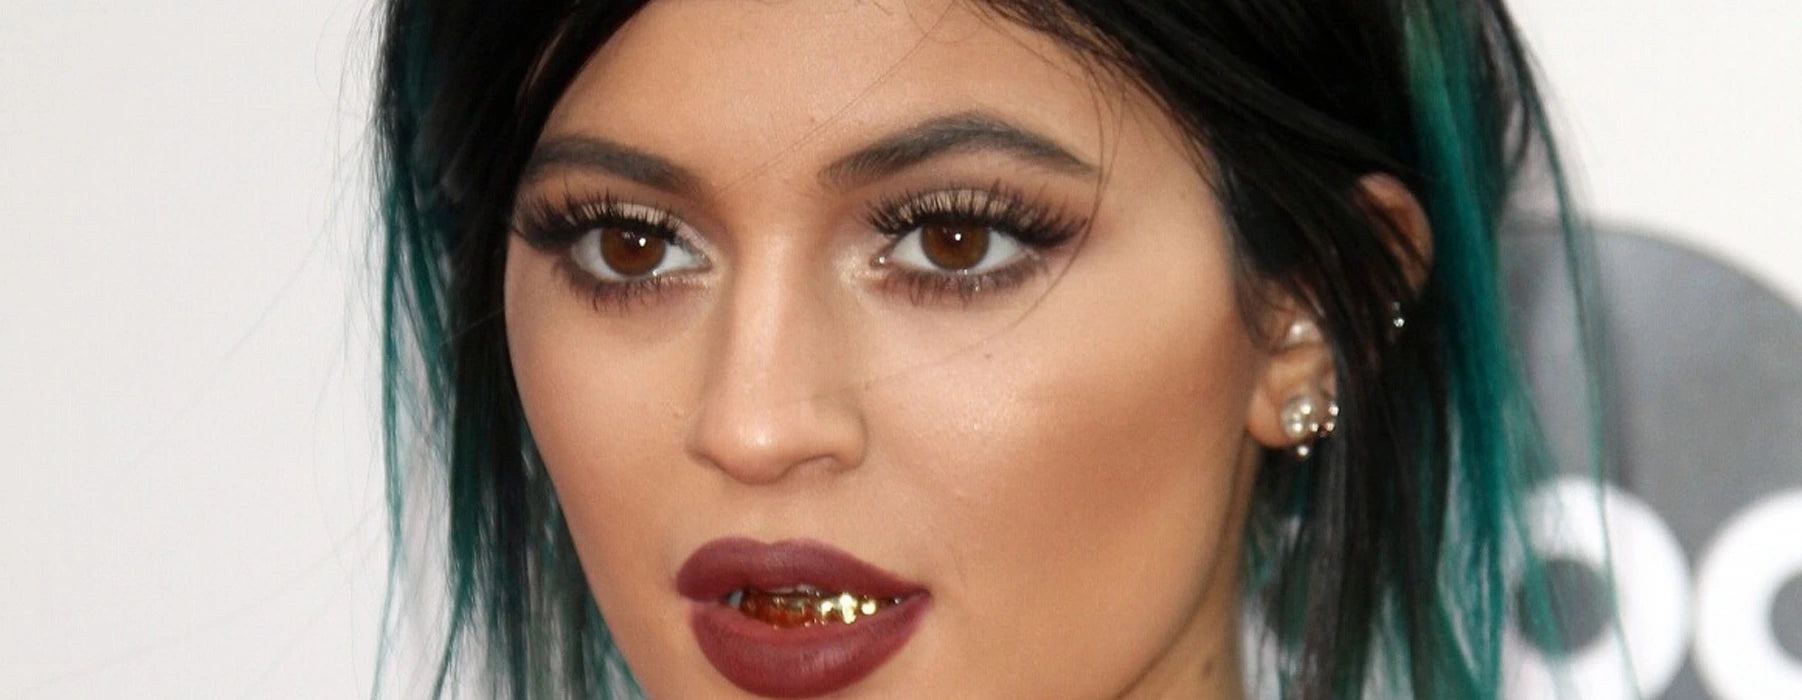 tooth gems kylie jenner, Kylie jenner wearing gold grillz